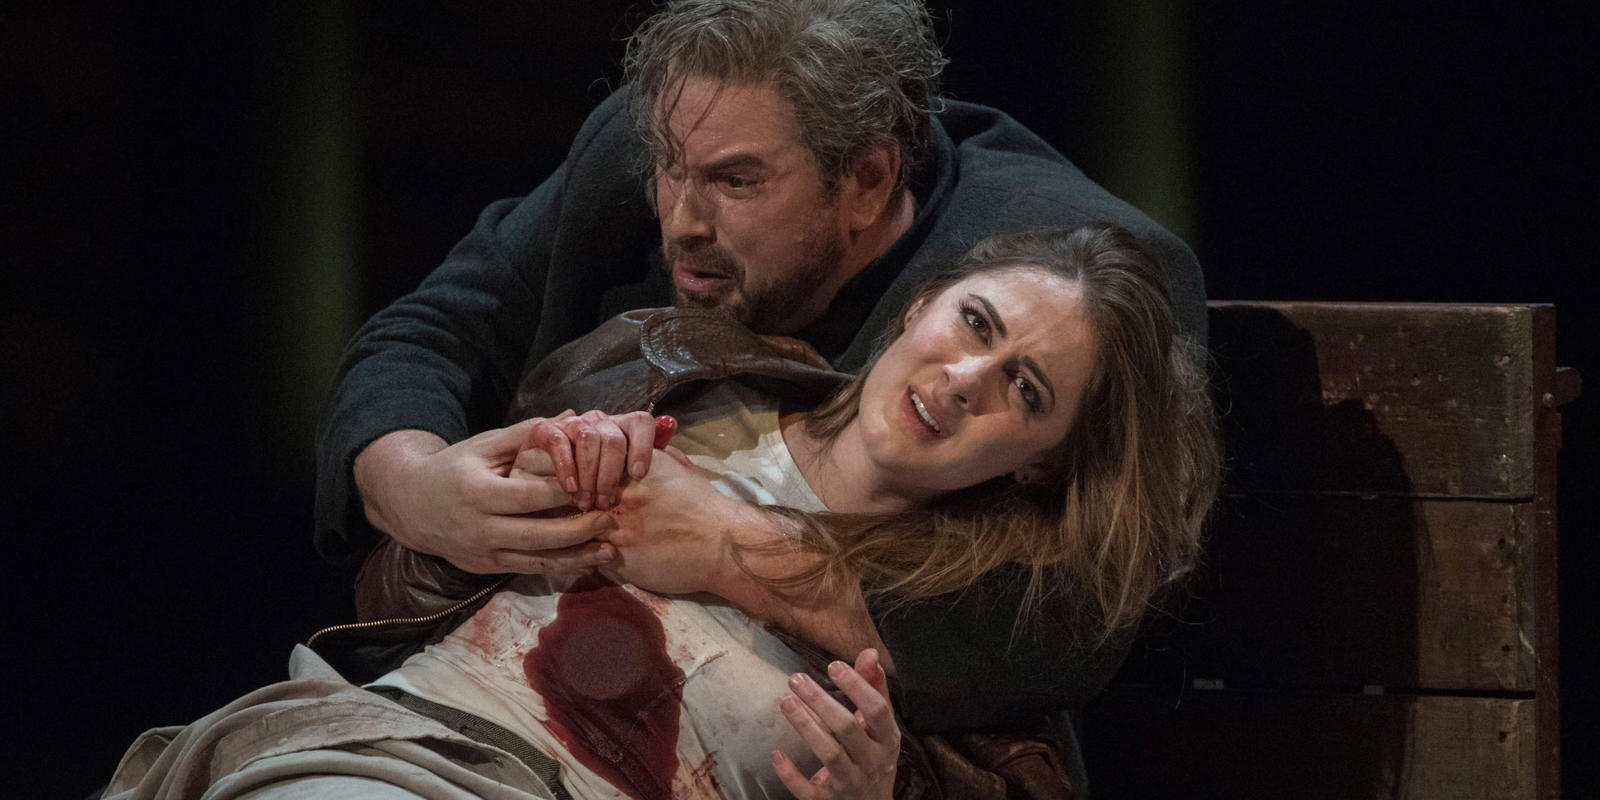 woman with fake stab wound and man holding her performing for rigoletto on stage